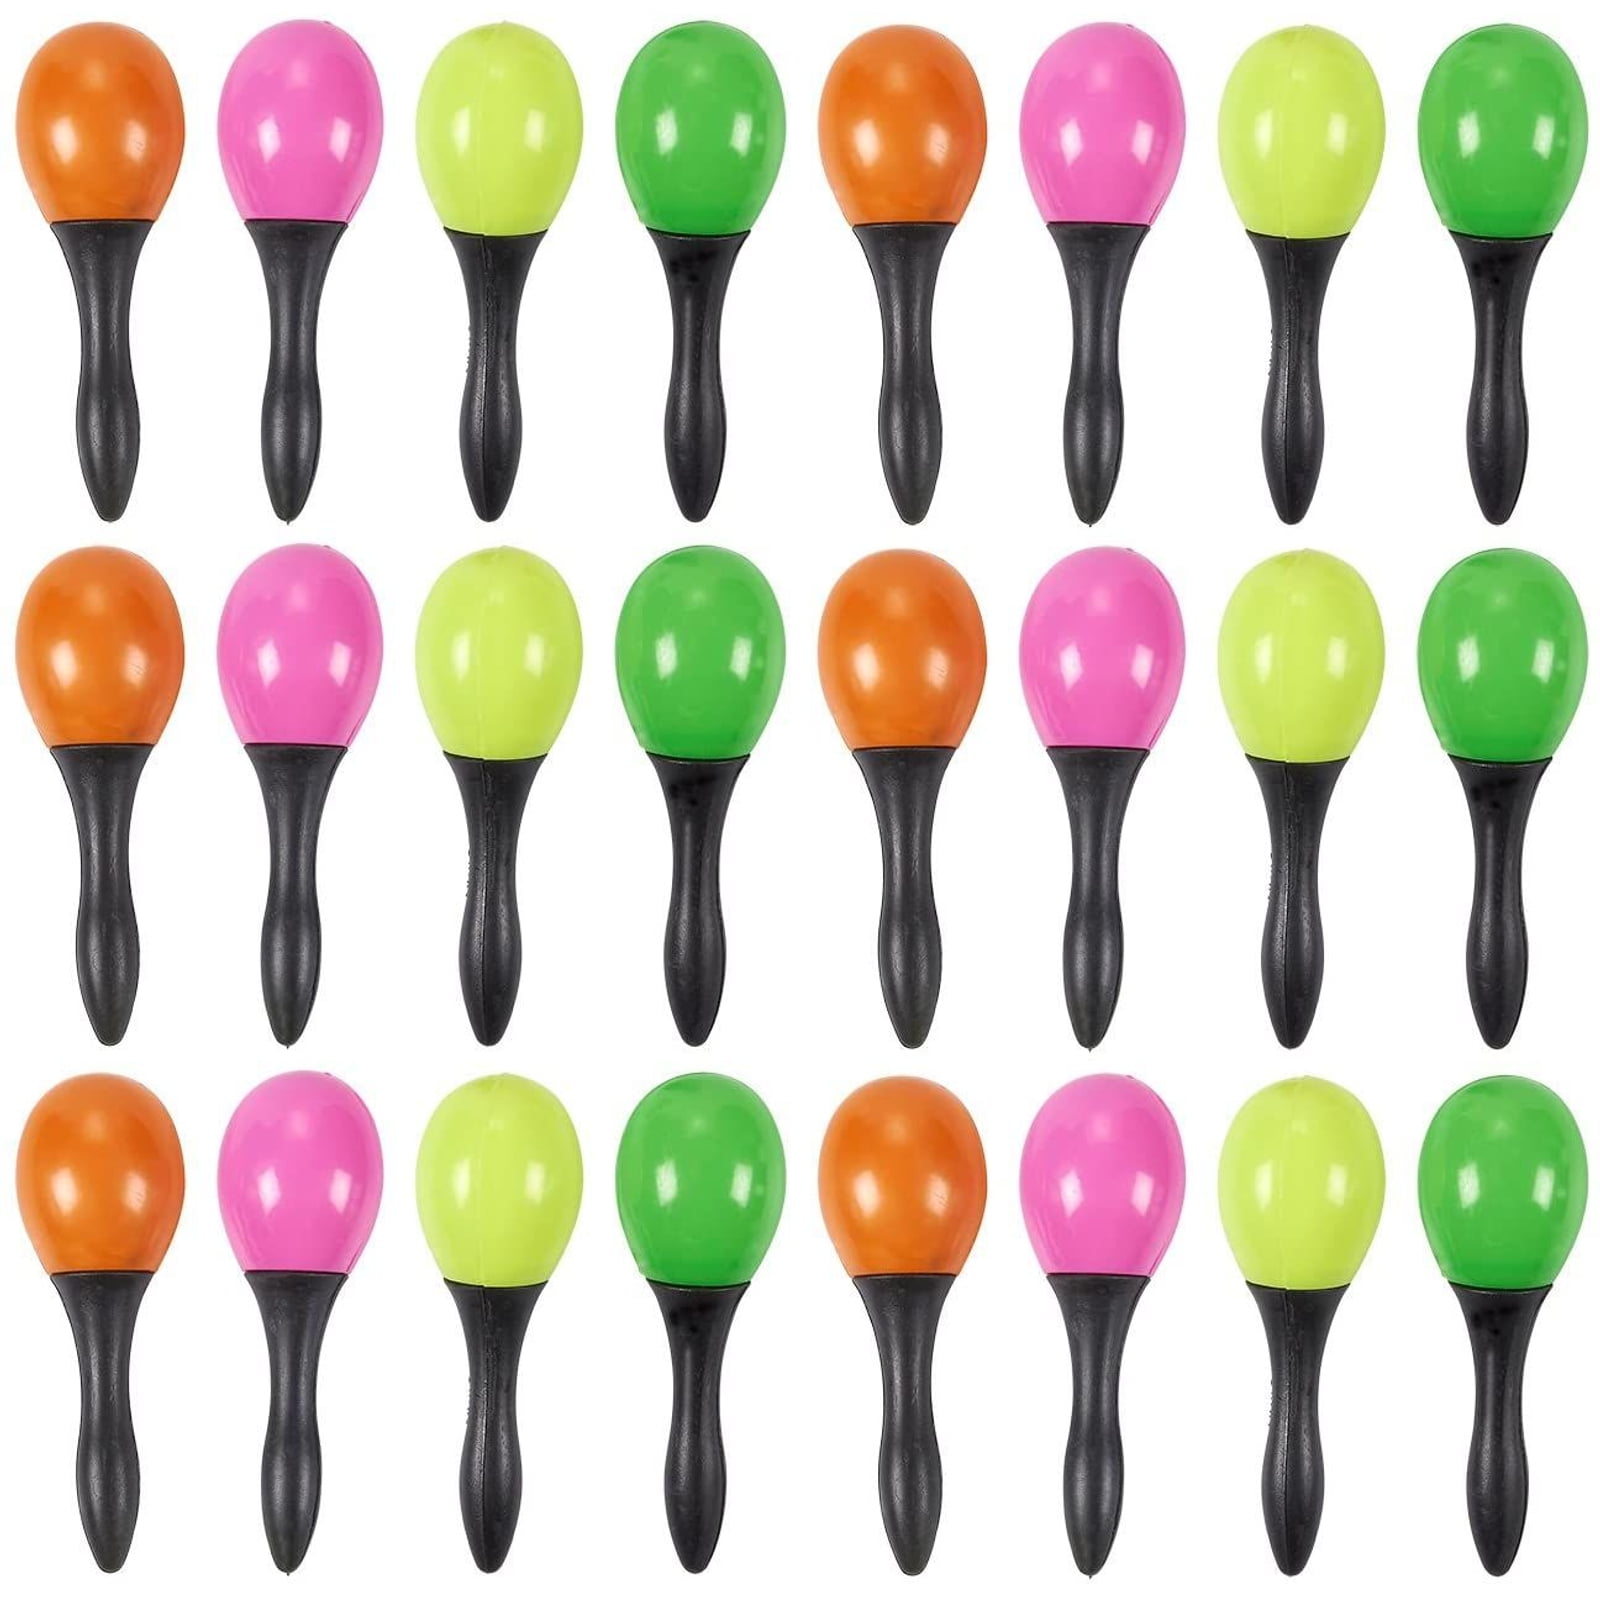 18PCS 4 Inch 6 Color Neon Maracas Shakers Mini Bulk Bright Colorful Noisemaker for Classroom Musical Instrument and Mexican Cinco de Mayo Fiesta’s Centerpiece Decoration Educational Toys for Kids 